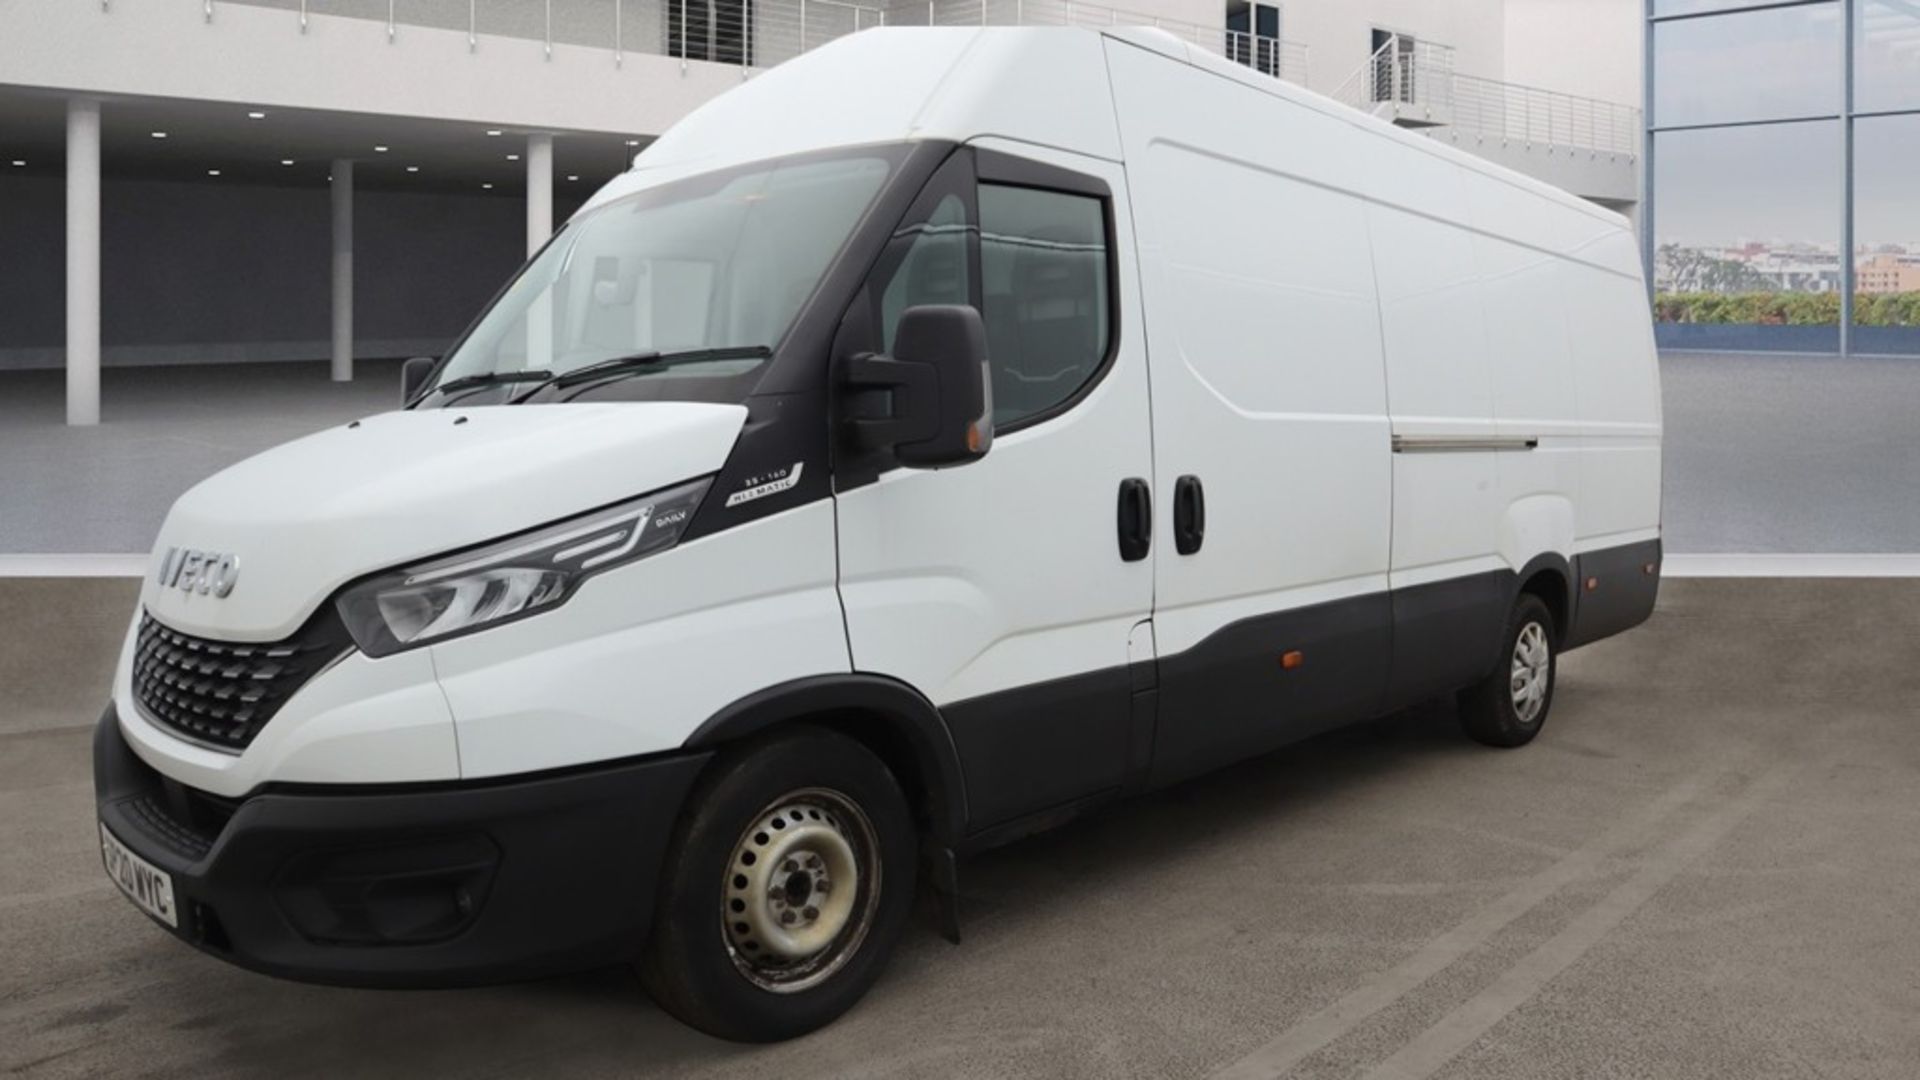 ** ON SALE ** Iveco Daily 2.3 HD 35S14v Hi Matic Automatic L3 H3 2020 '20 Reg' Panel Van - Image 2 of 9